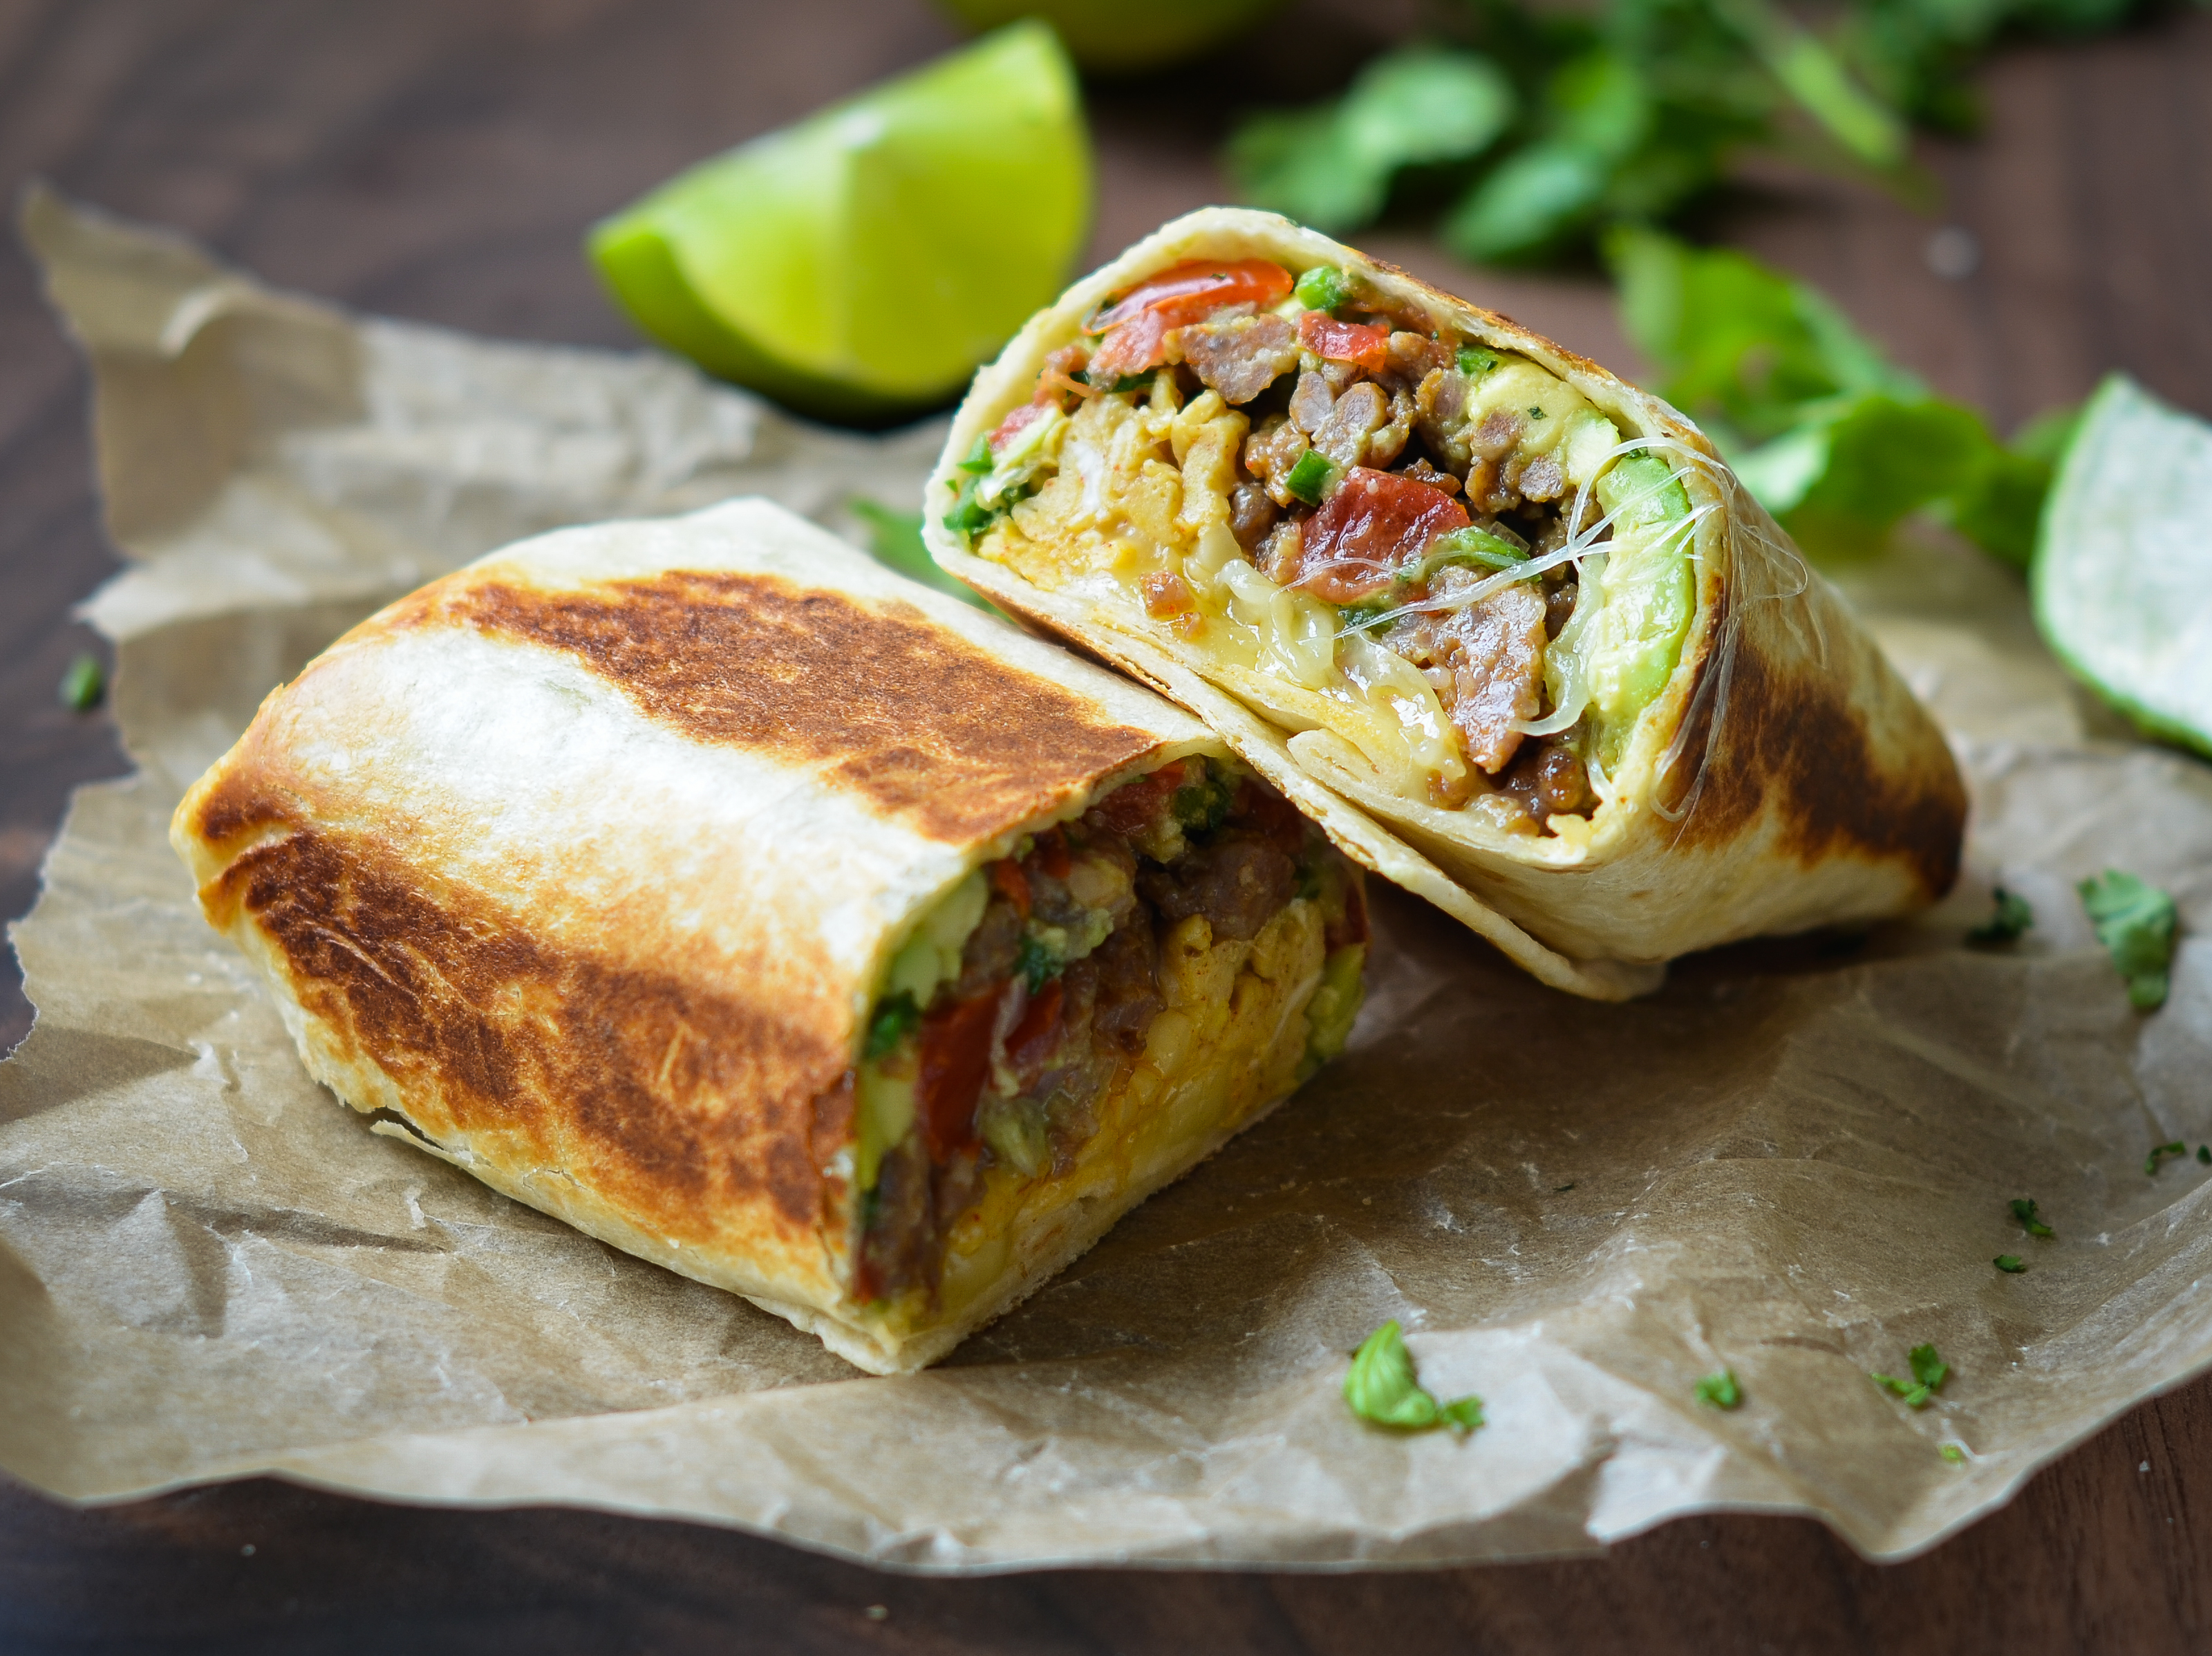 Make Breakfast Burritos Quickly and Easily